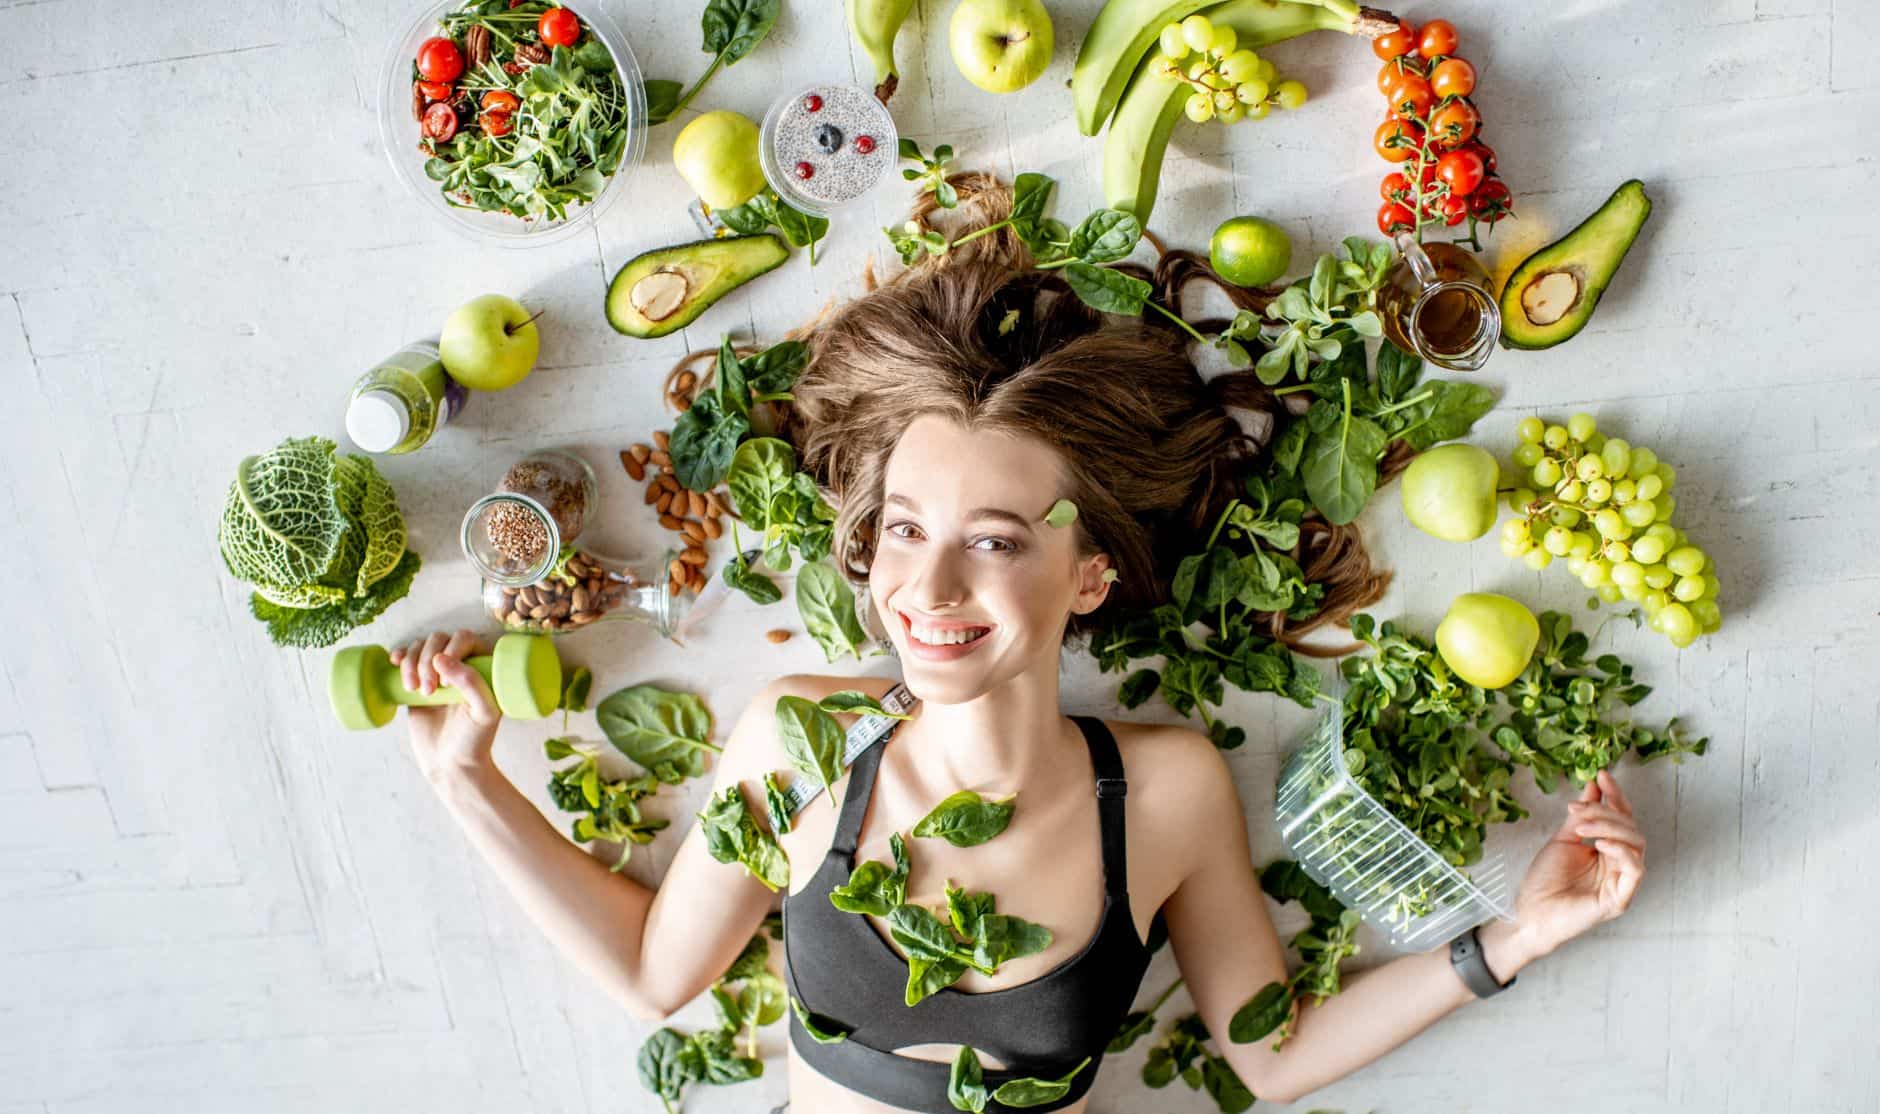 Girl with fruits and vegetables